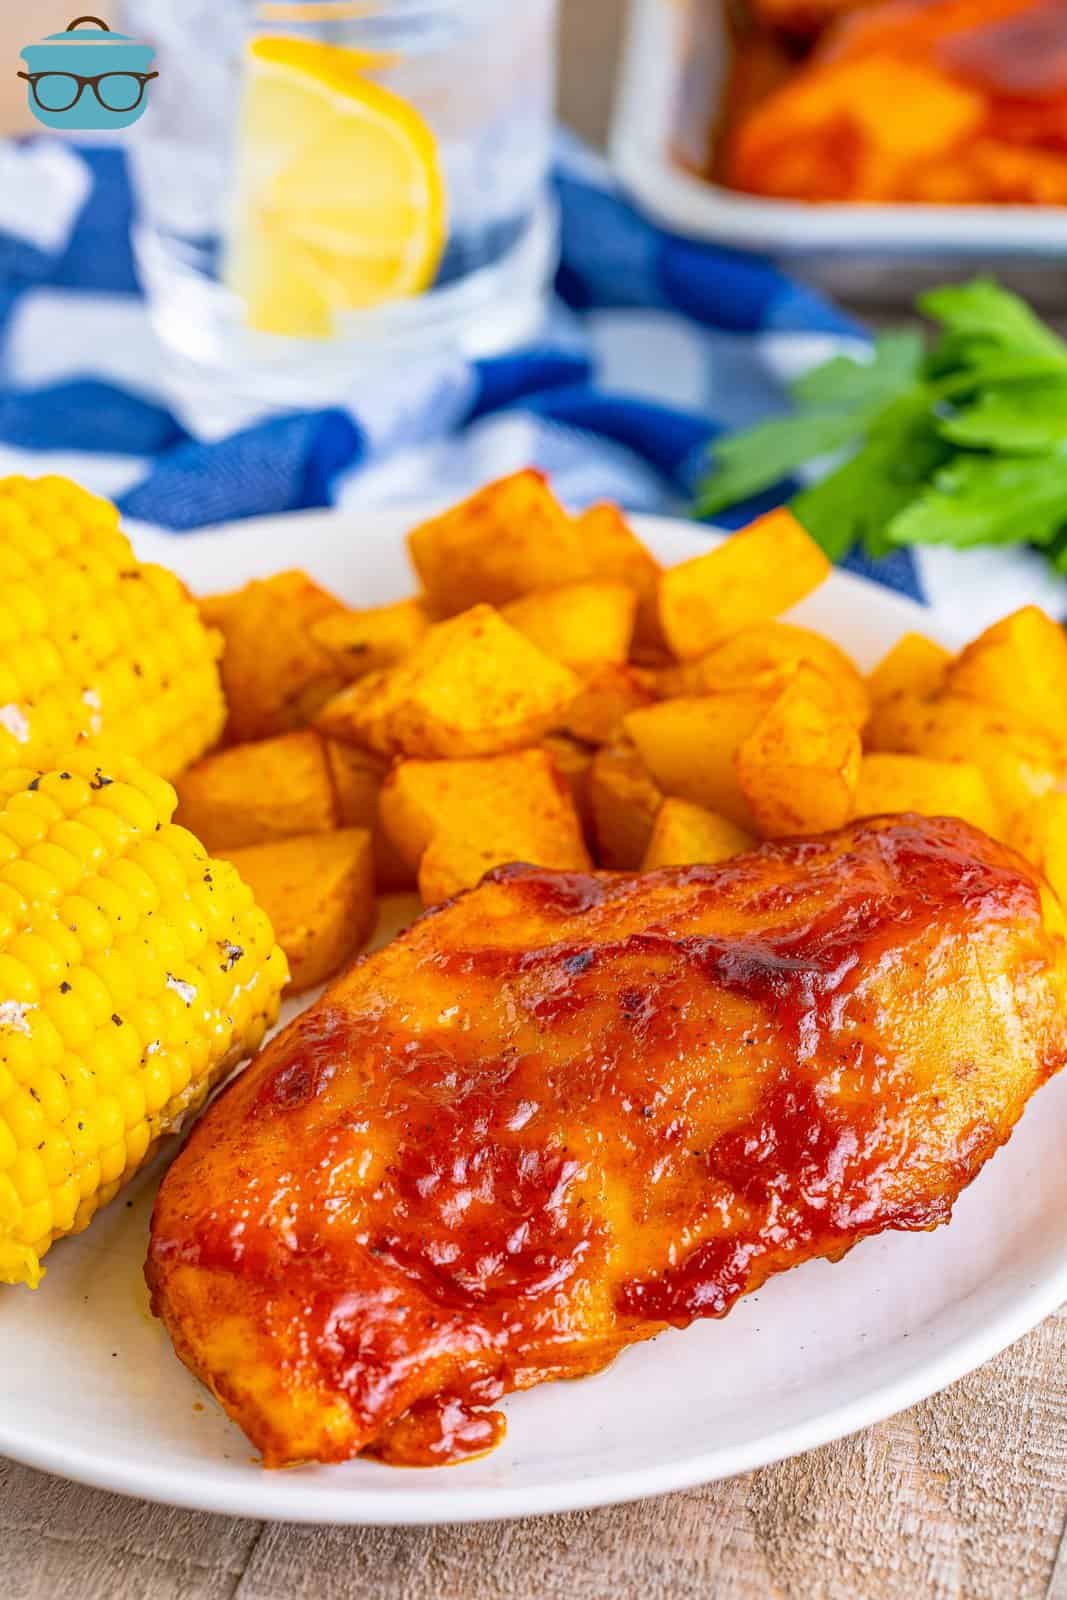 A close look at the plate of chicken, potatoes, and corn.